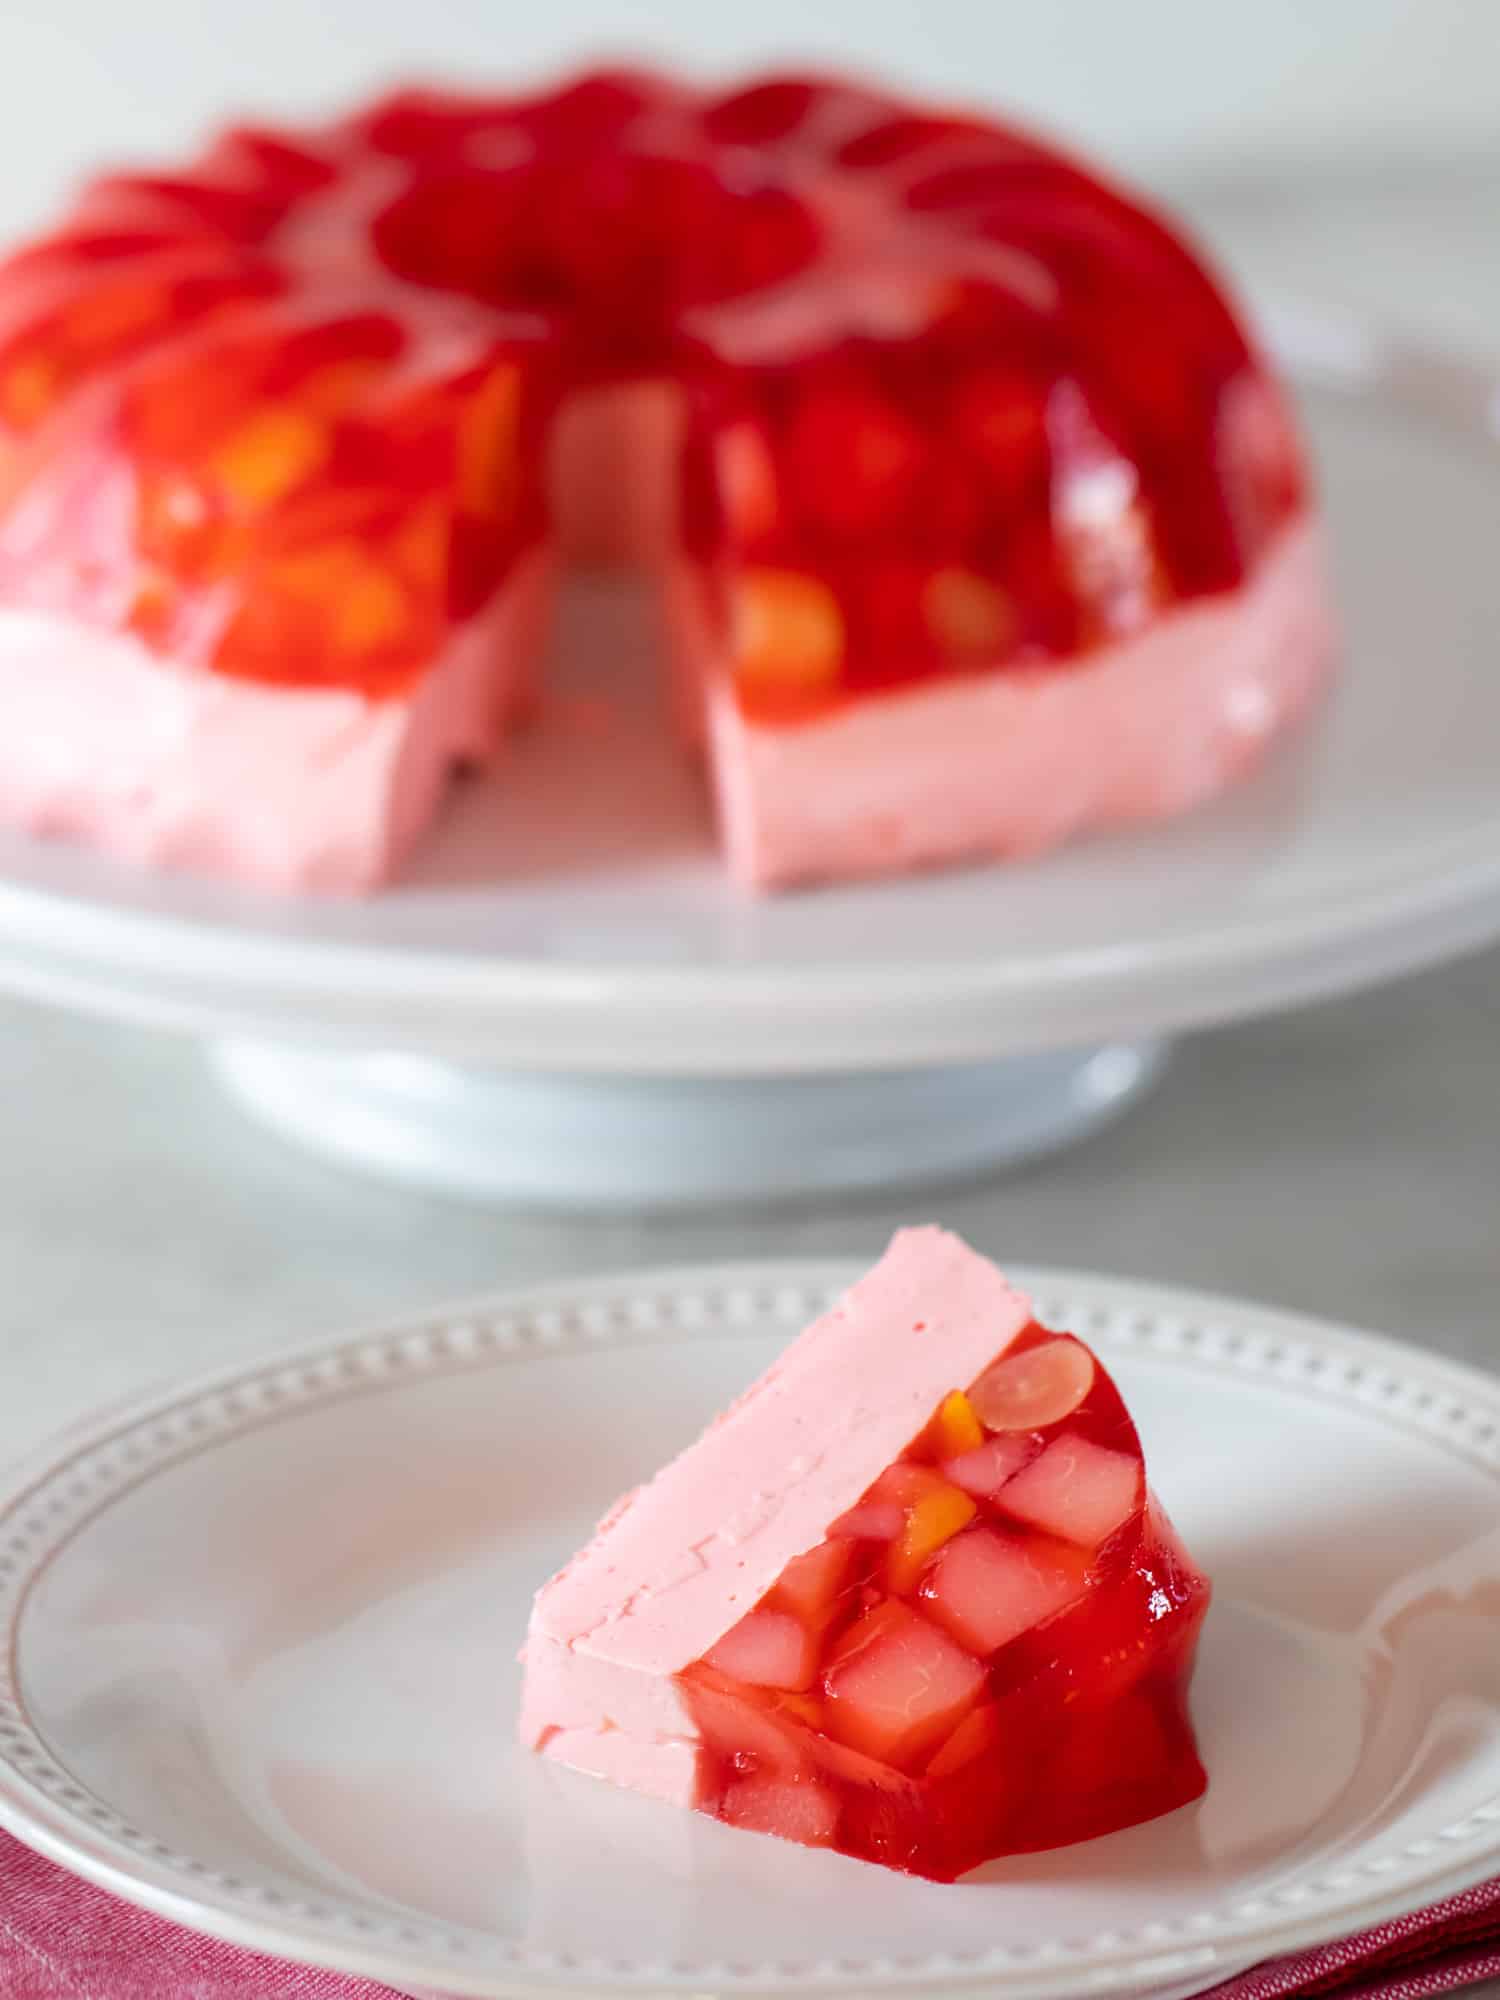 https://www.theblackpeppercorn.com/wp-content/uploads/2019/11/Jello-Mold-with-Fruit-Salad-Tall-1.jpg